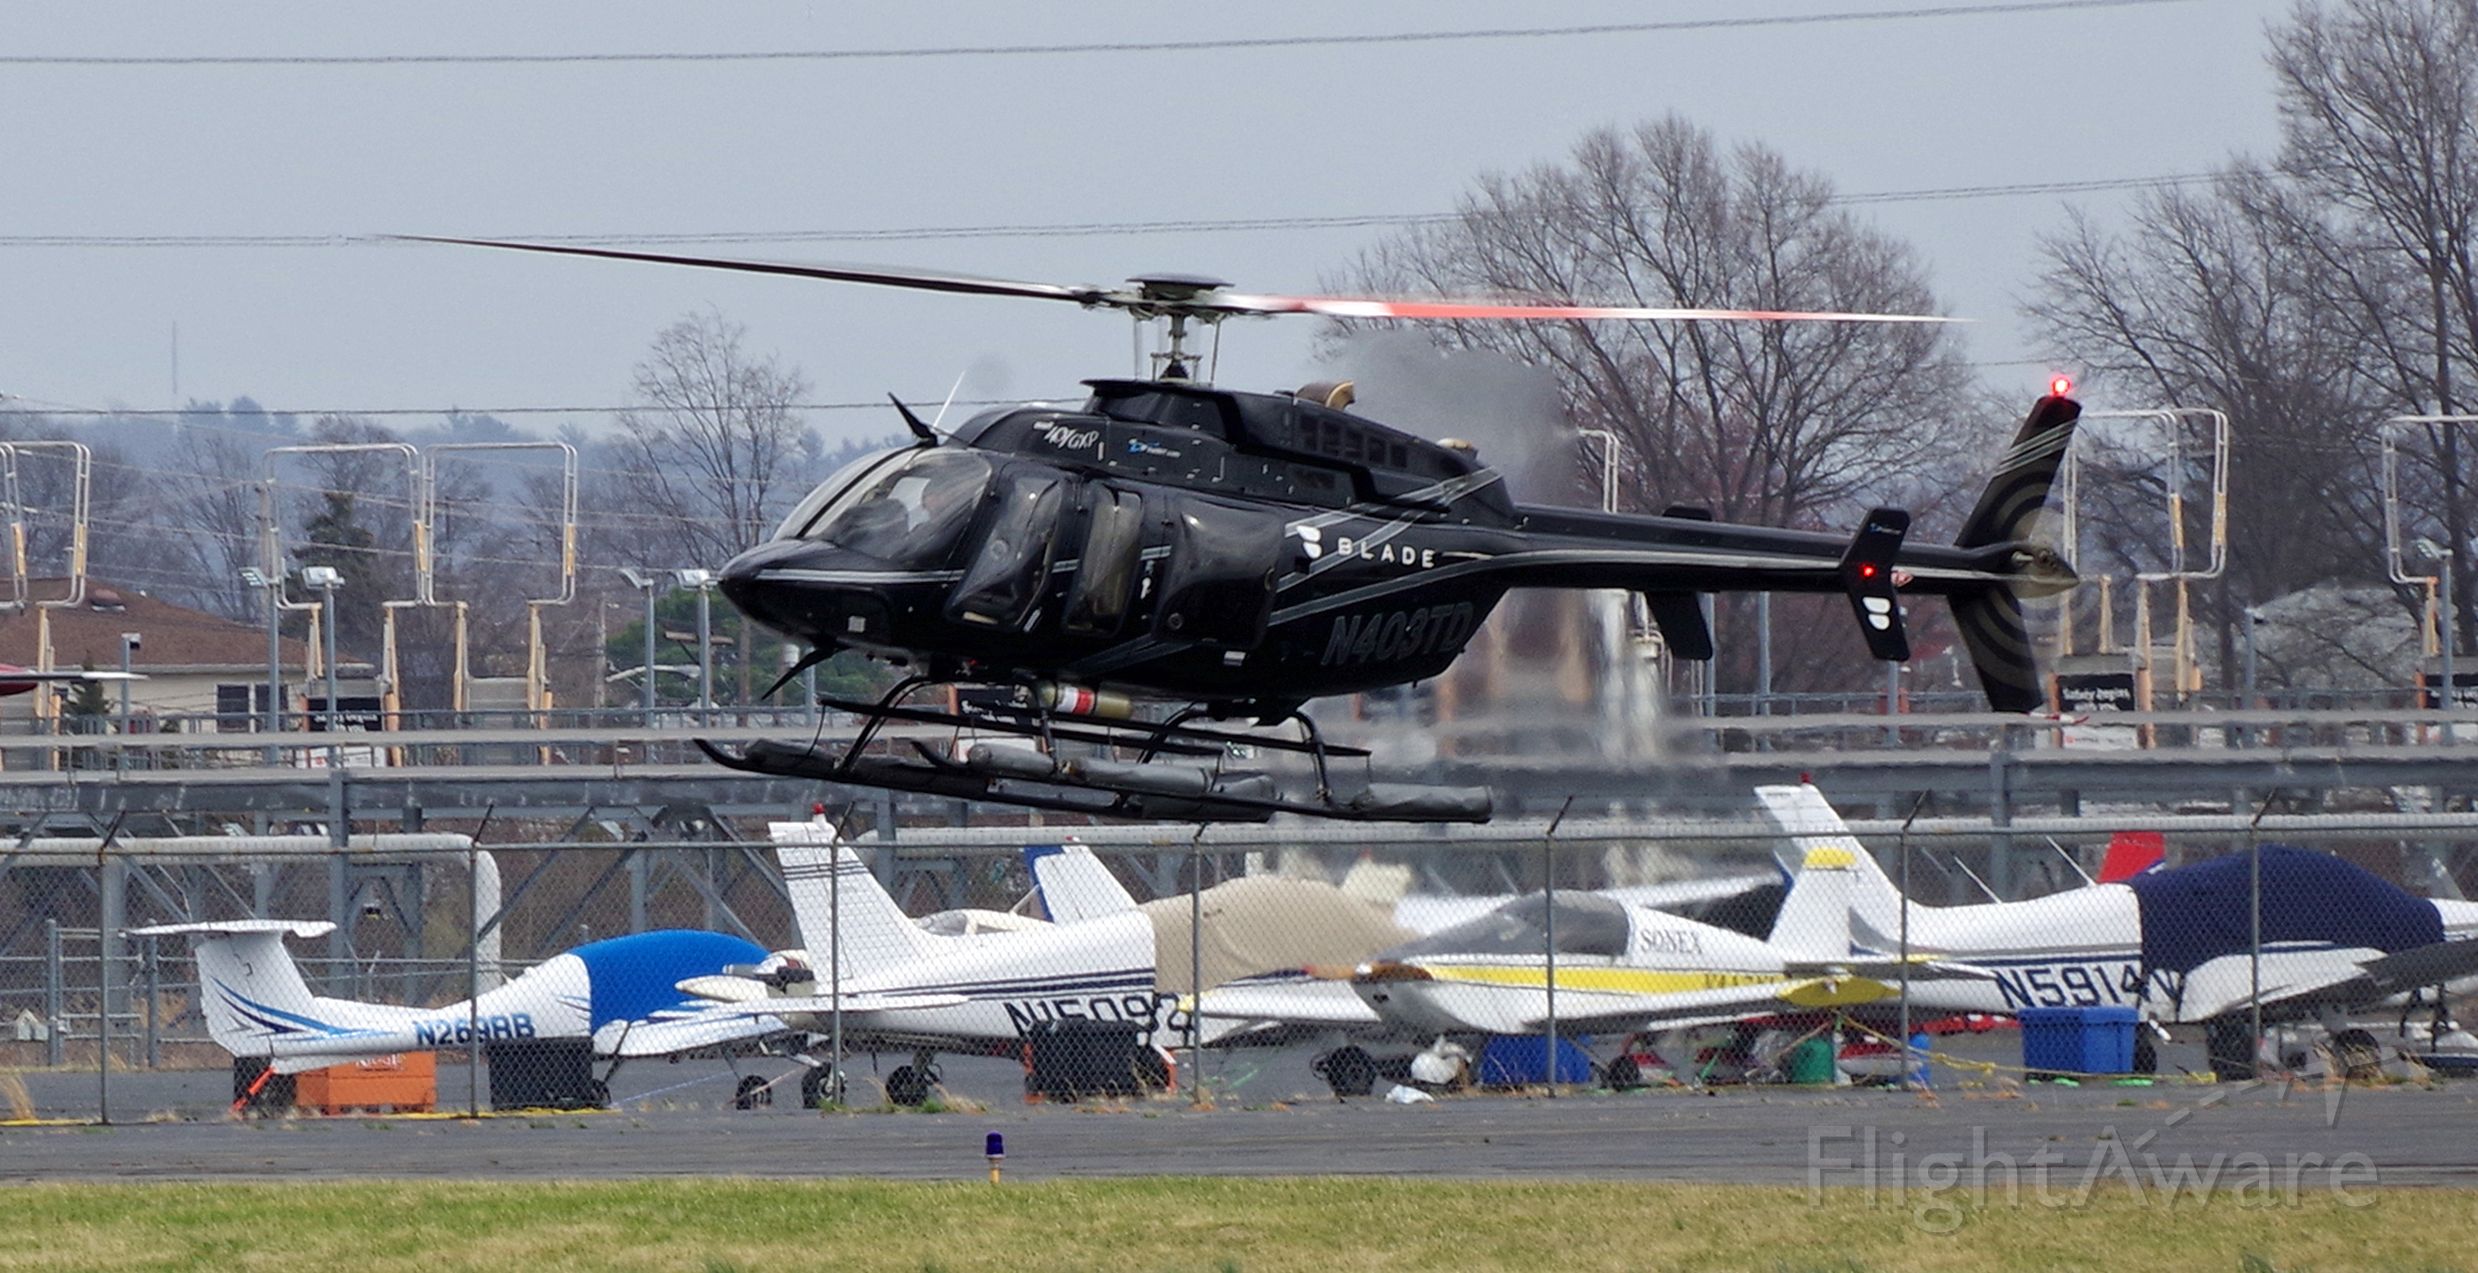 Bell 407 (N403TD) - LINDEN AIRPORT-LINDEN, NEW JERSEY, USA-MARCH 31, 2022: A helicopter operated for the Blade Company is seen by RF at Linden Airport.